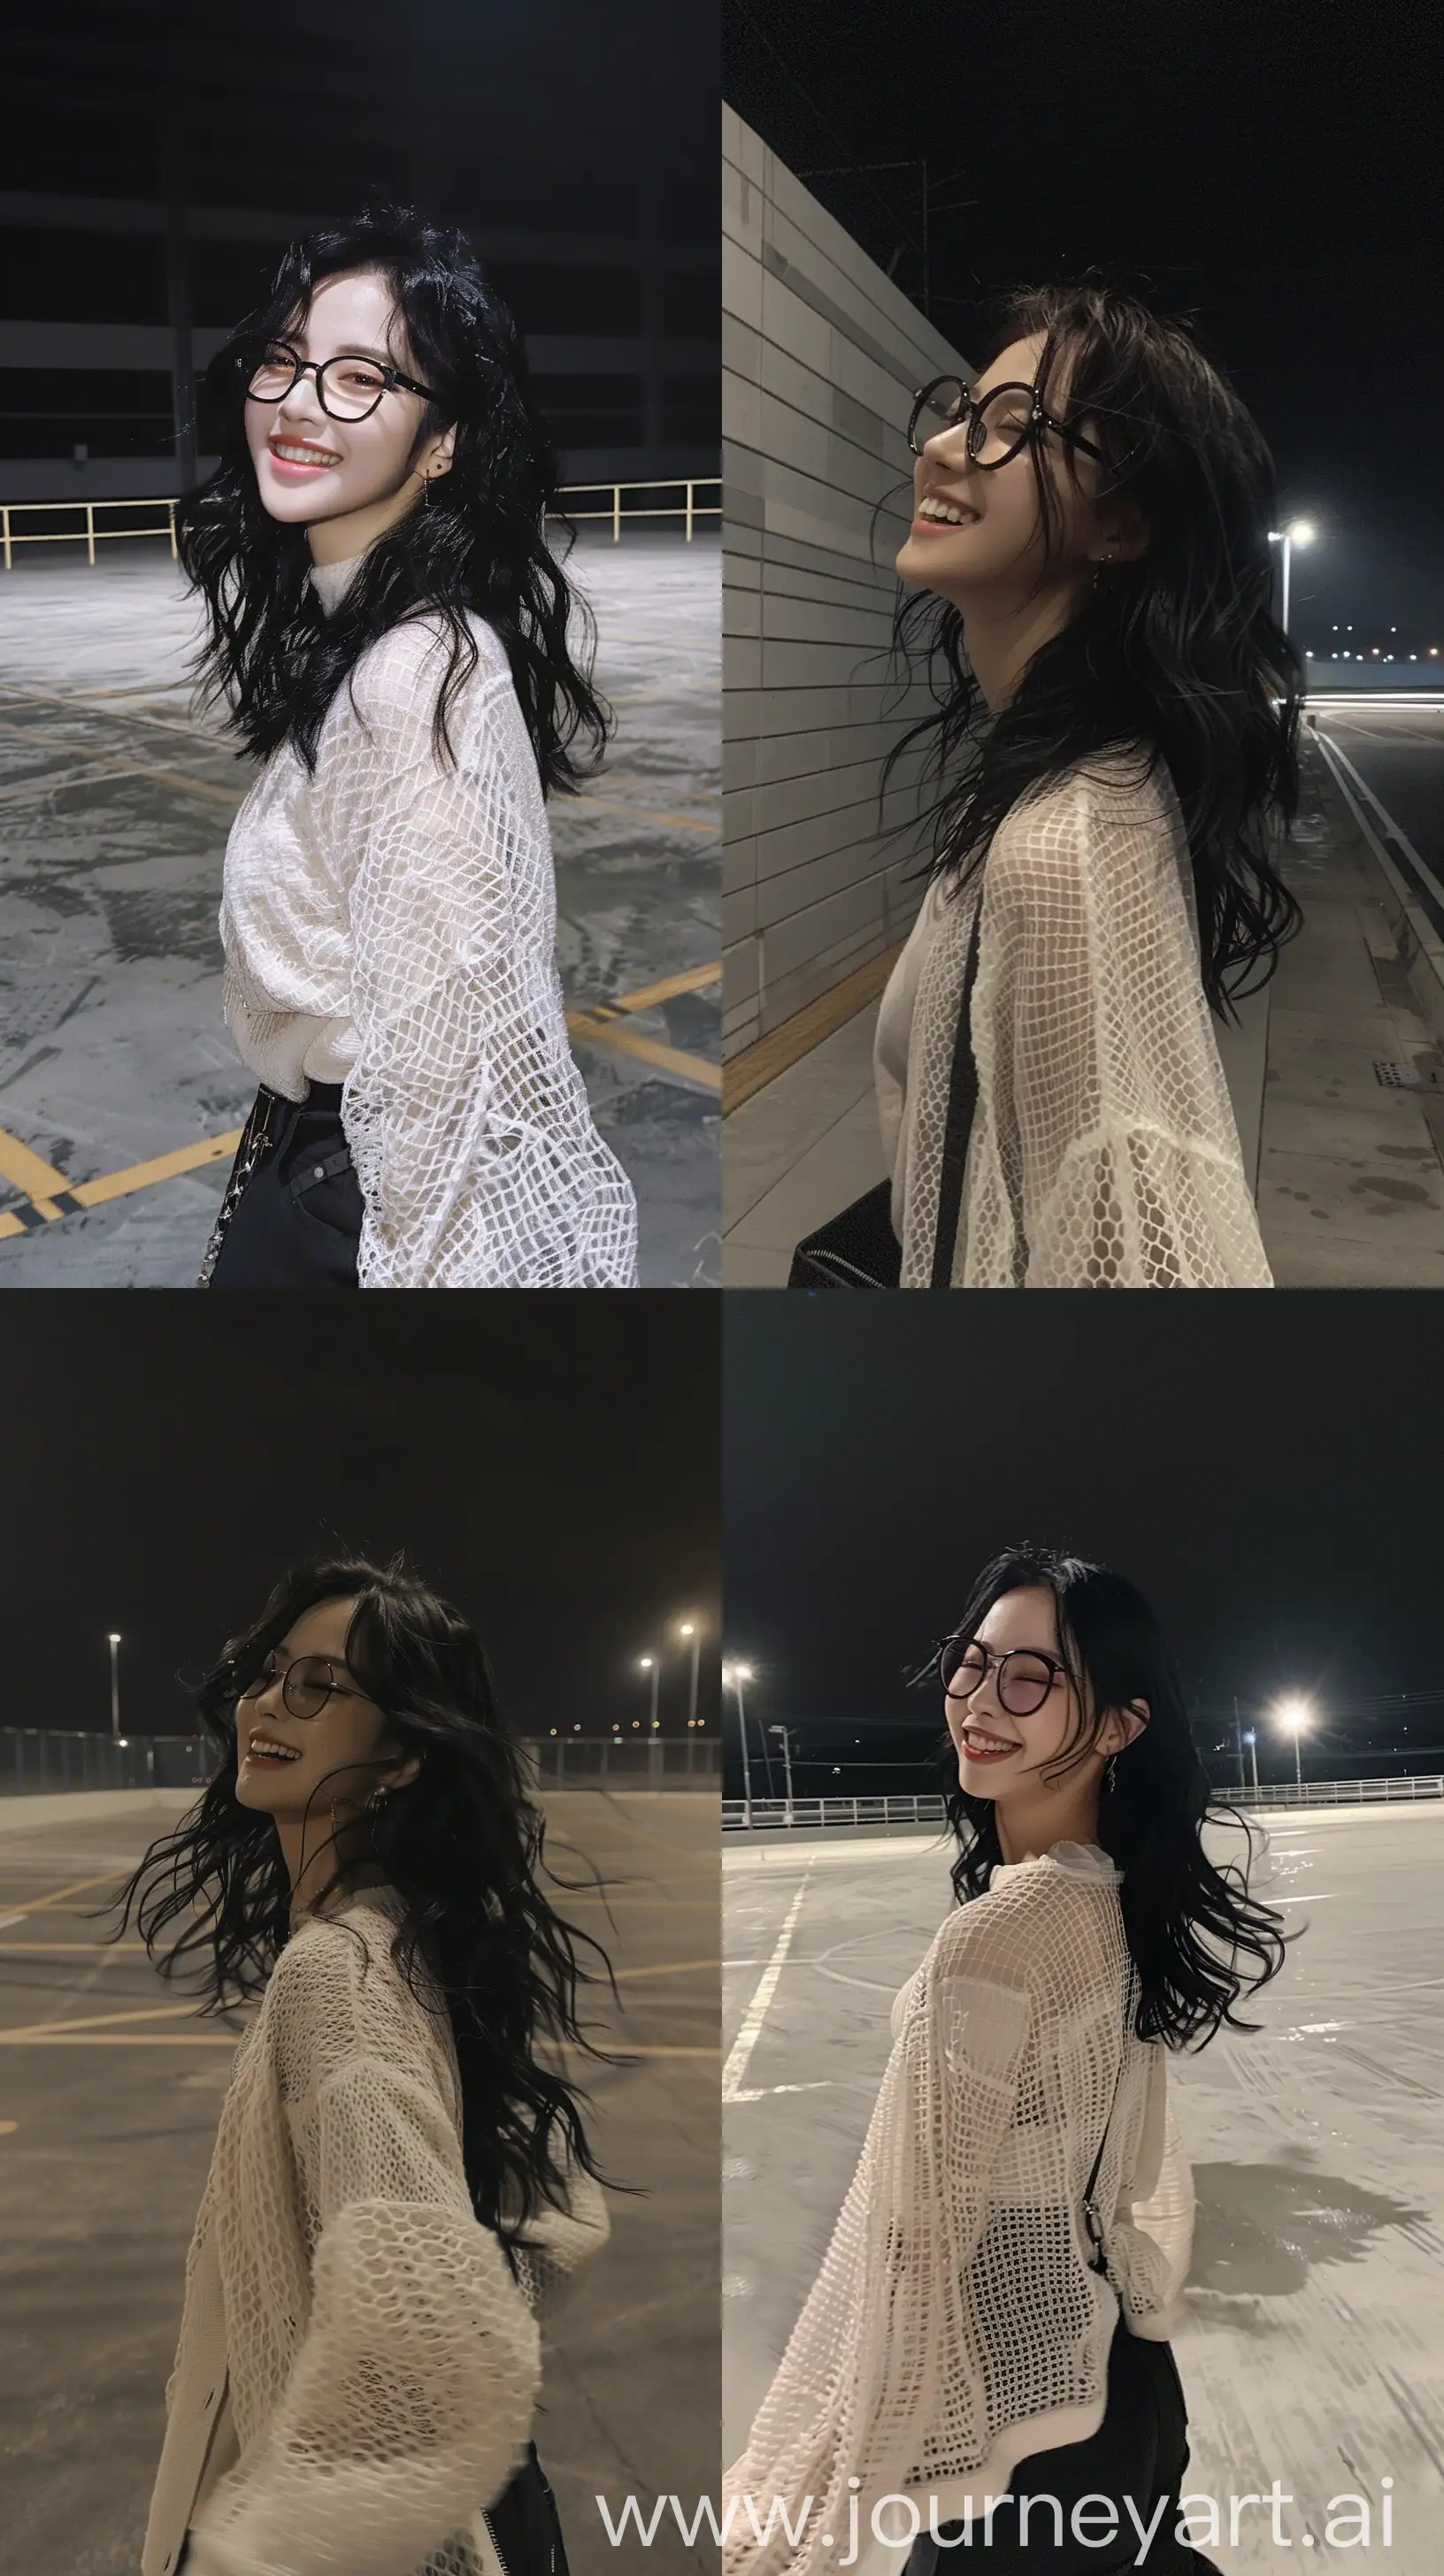 Nighttime-Aesthetic-Selfie-Jennie-from-Blackpink-with-Wavy-Black-Wolfcut-Hair-and-Chic-White-Net-Cardigan